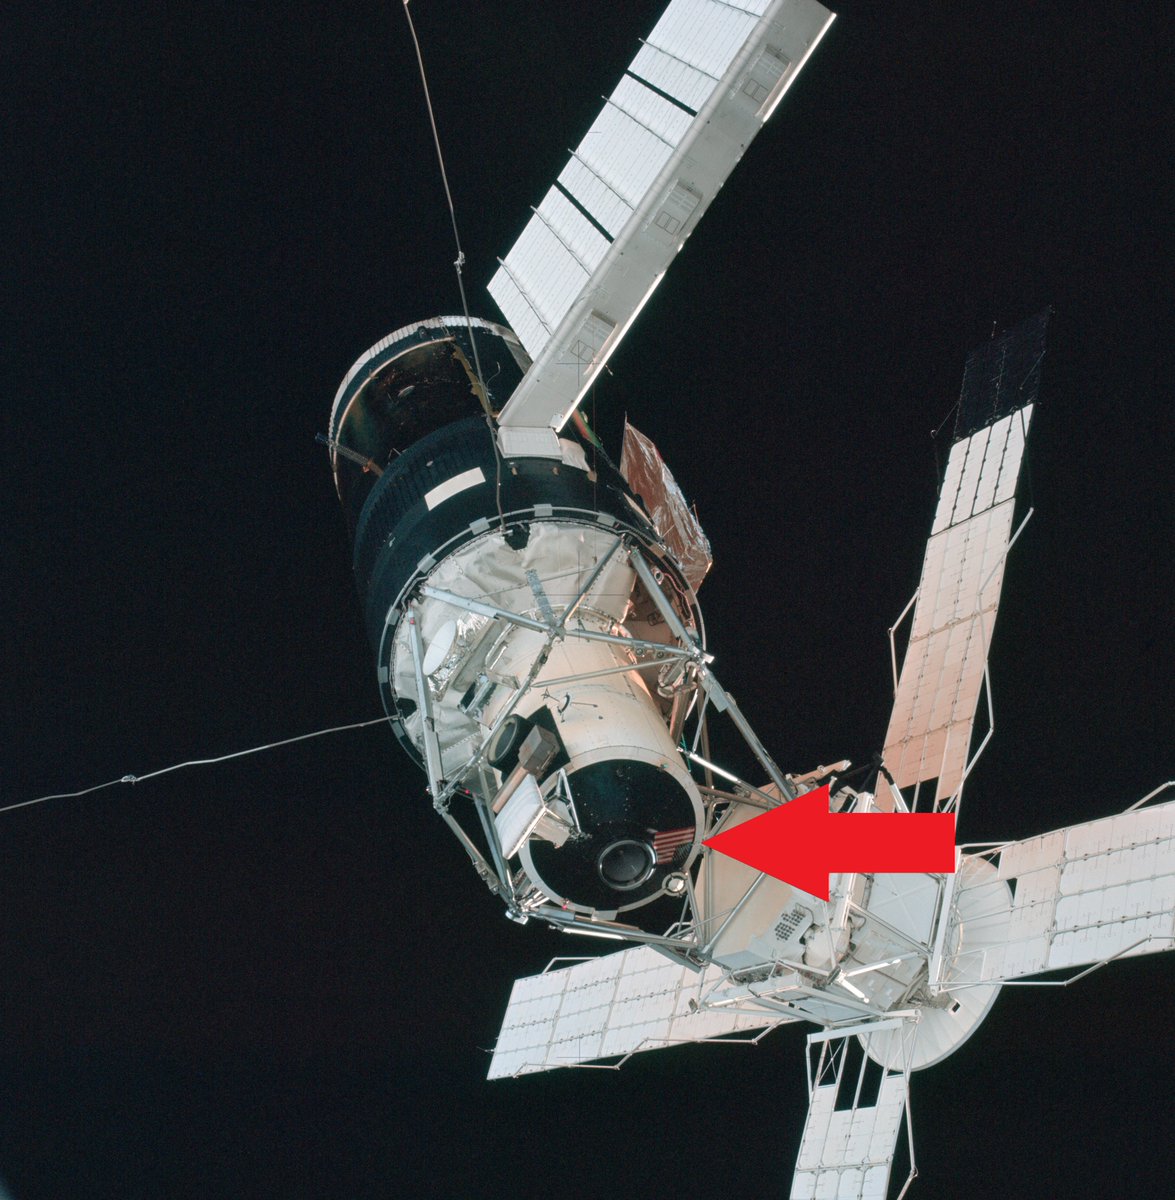 Fun fact: the final change to Skylab was made just before it launched, when Martin Marietta engineers realized they had forgotten something, and affixed a metal United States flag to the docking adapter.